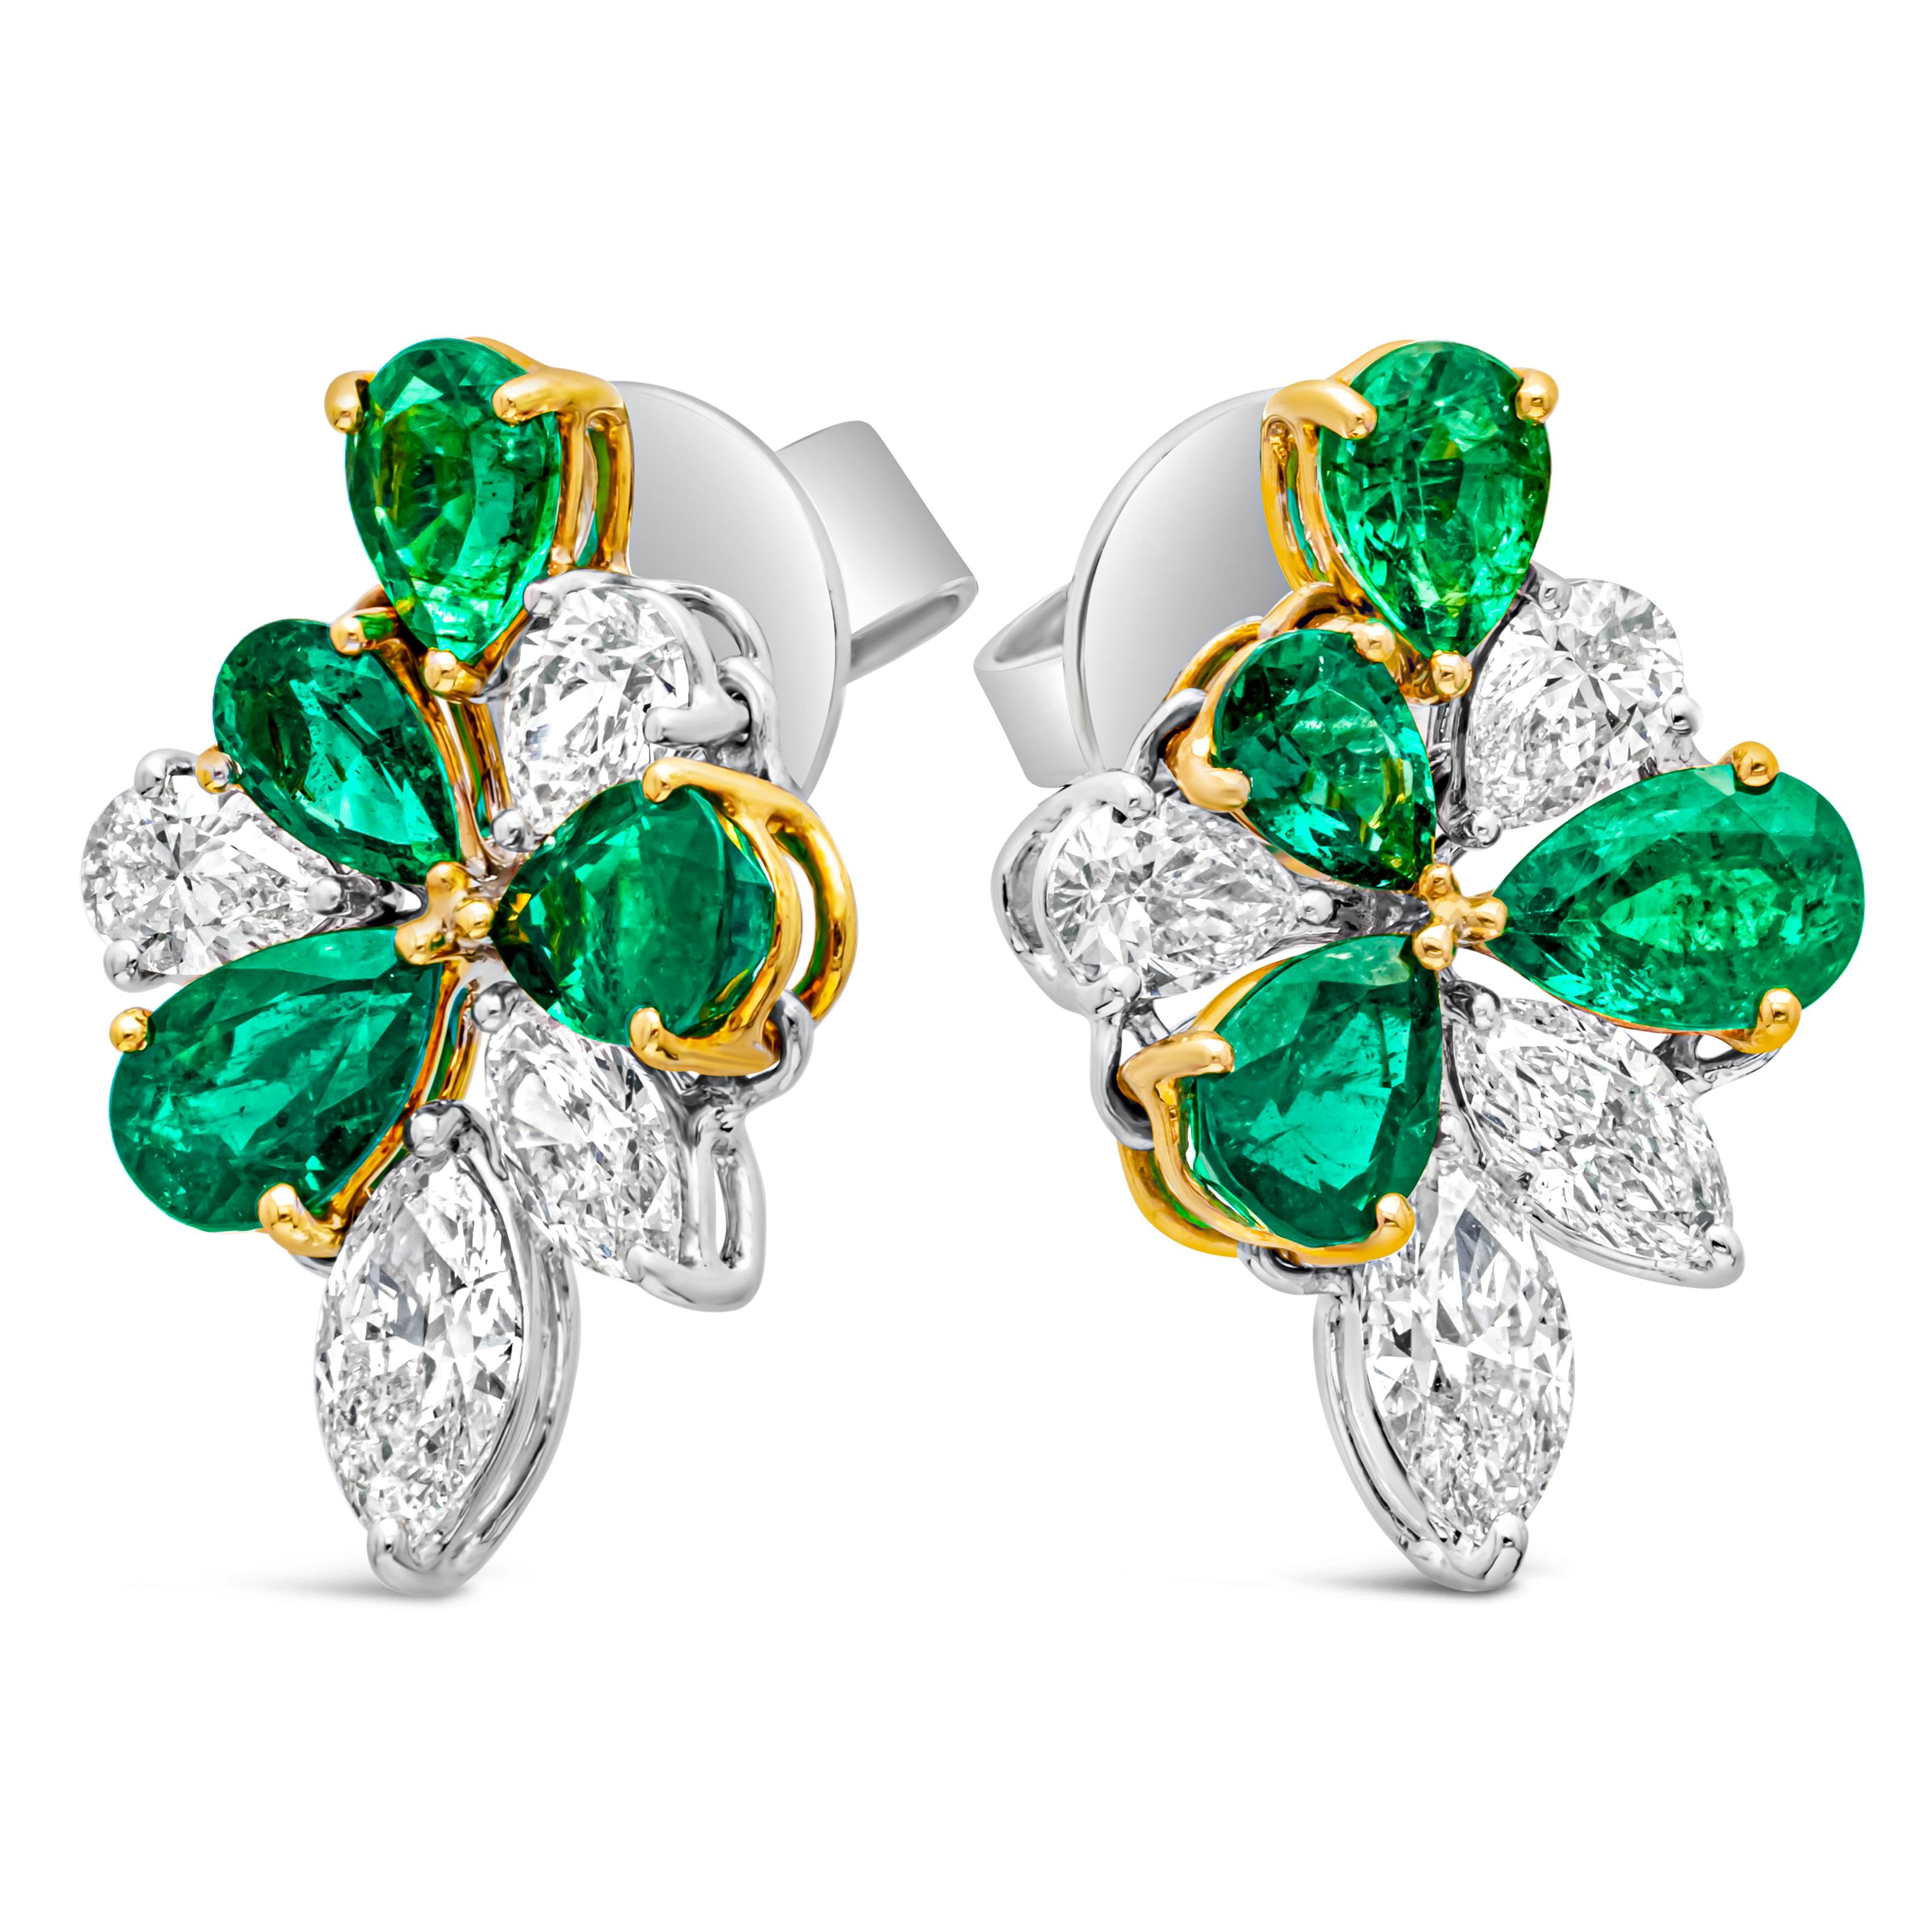 Contemporary 4.16 Carats Total Marquise and Pear Shape Green Emerald & Diamond Stud Earrings For Sale